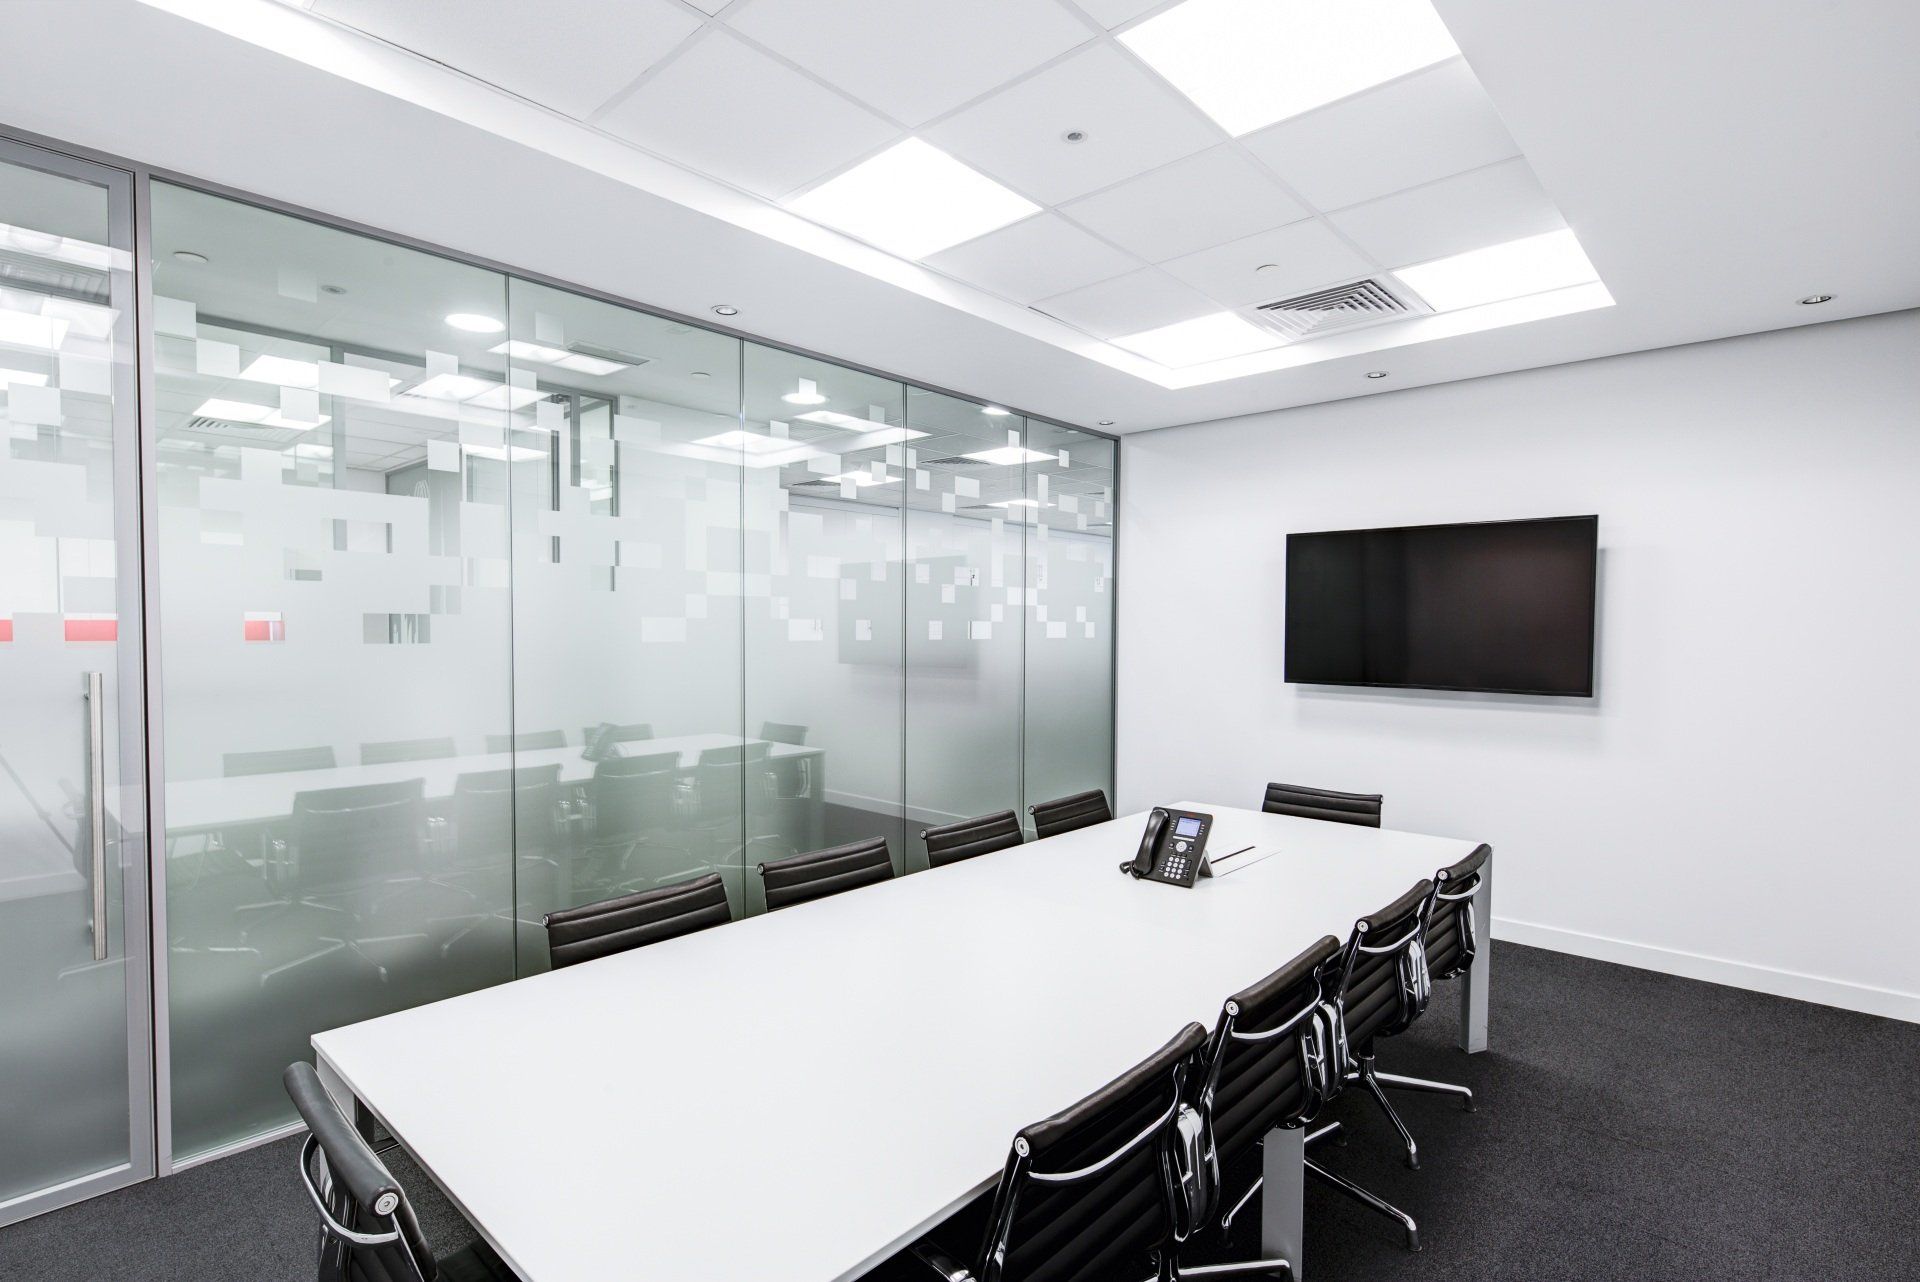 perfectly renovated conference room with t bar ceiling